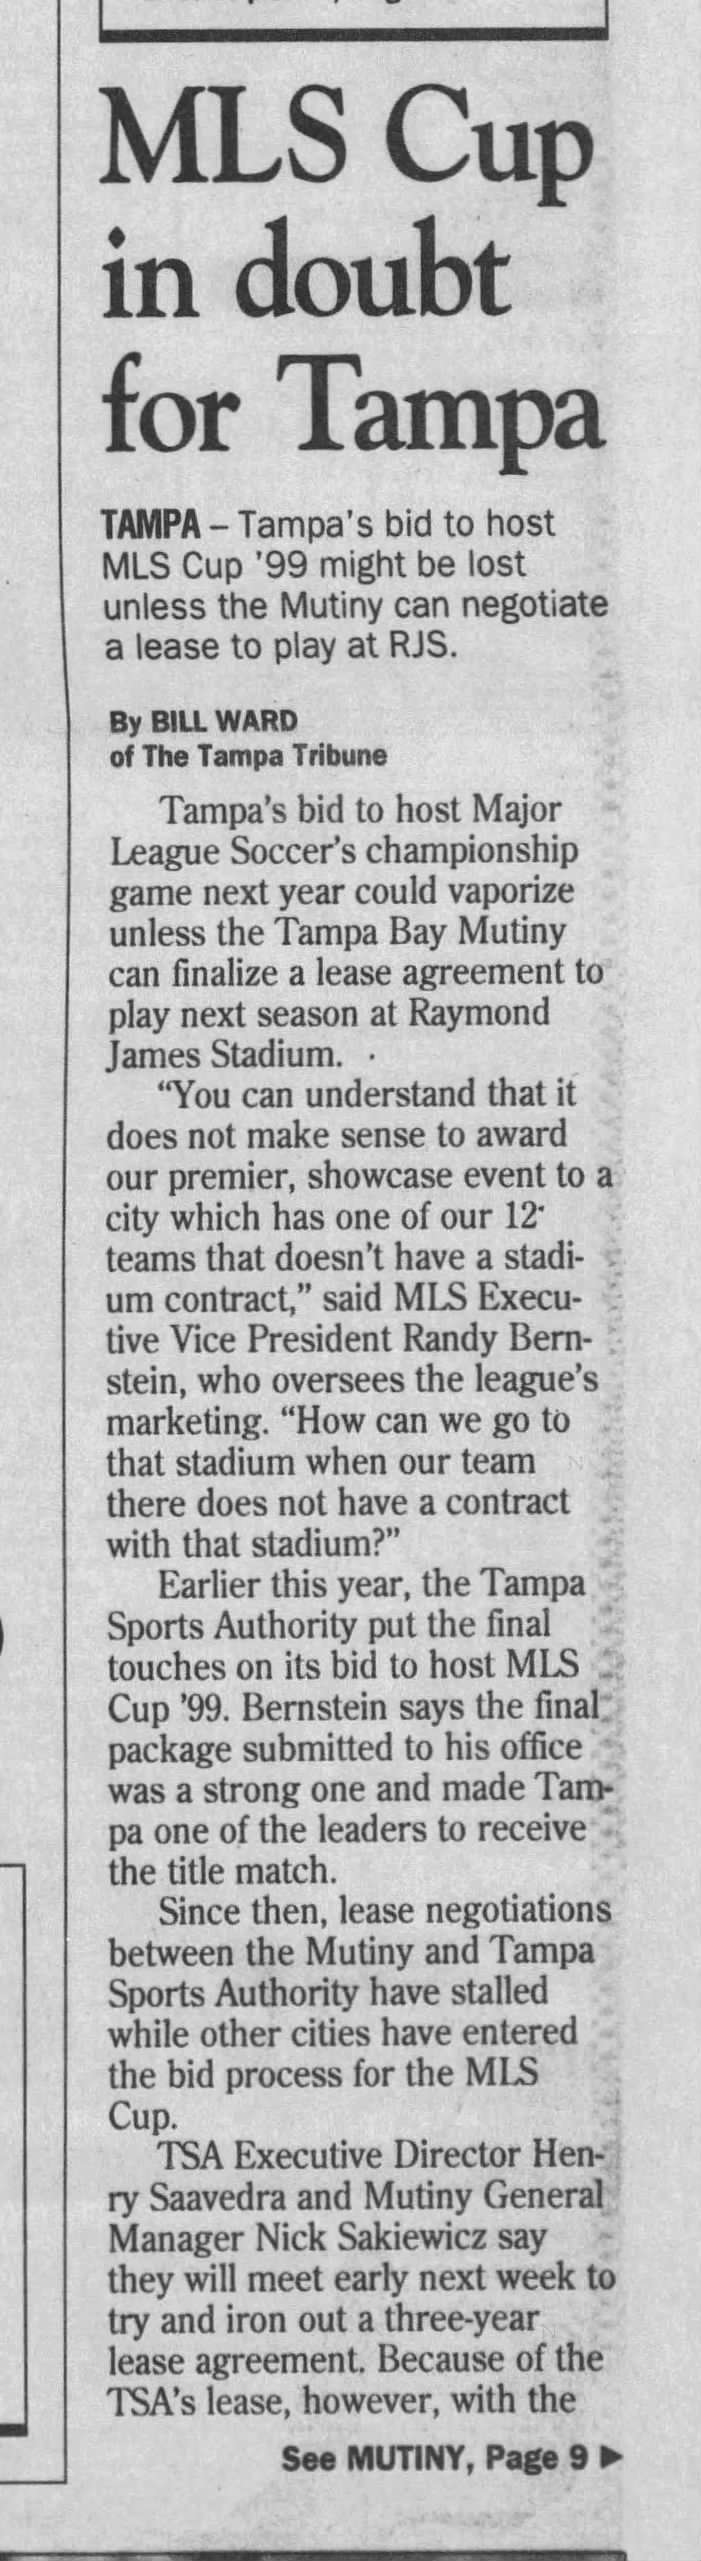 MLS Cup in doubt for Tampa